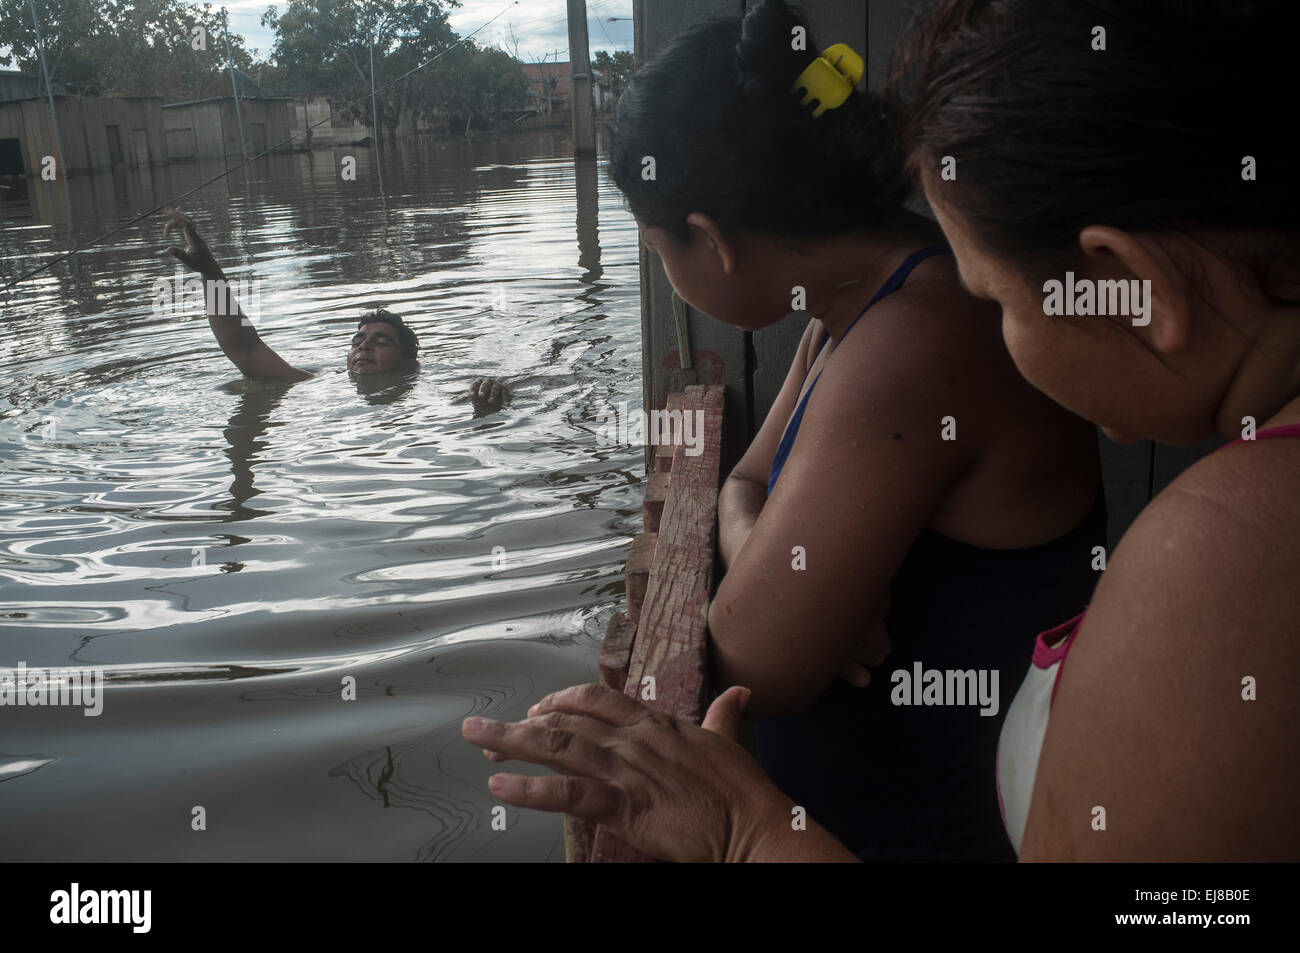 2015 flooding in Brazilian Amazon - flooded house in Taquari district, Rio Branco city, Acre State. Jose Alcides dos Santos swims in the dark and dirt waters of Acre river besides his house while his family waits in the balcony. Floods have been affecting thousands of people in the state of Acre, northern Brazil, since 23 February 2015, when some of the state’s rivers, in particular the Acre river, overflowed. Stock Photo